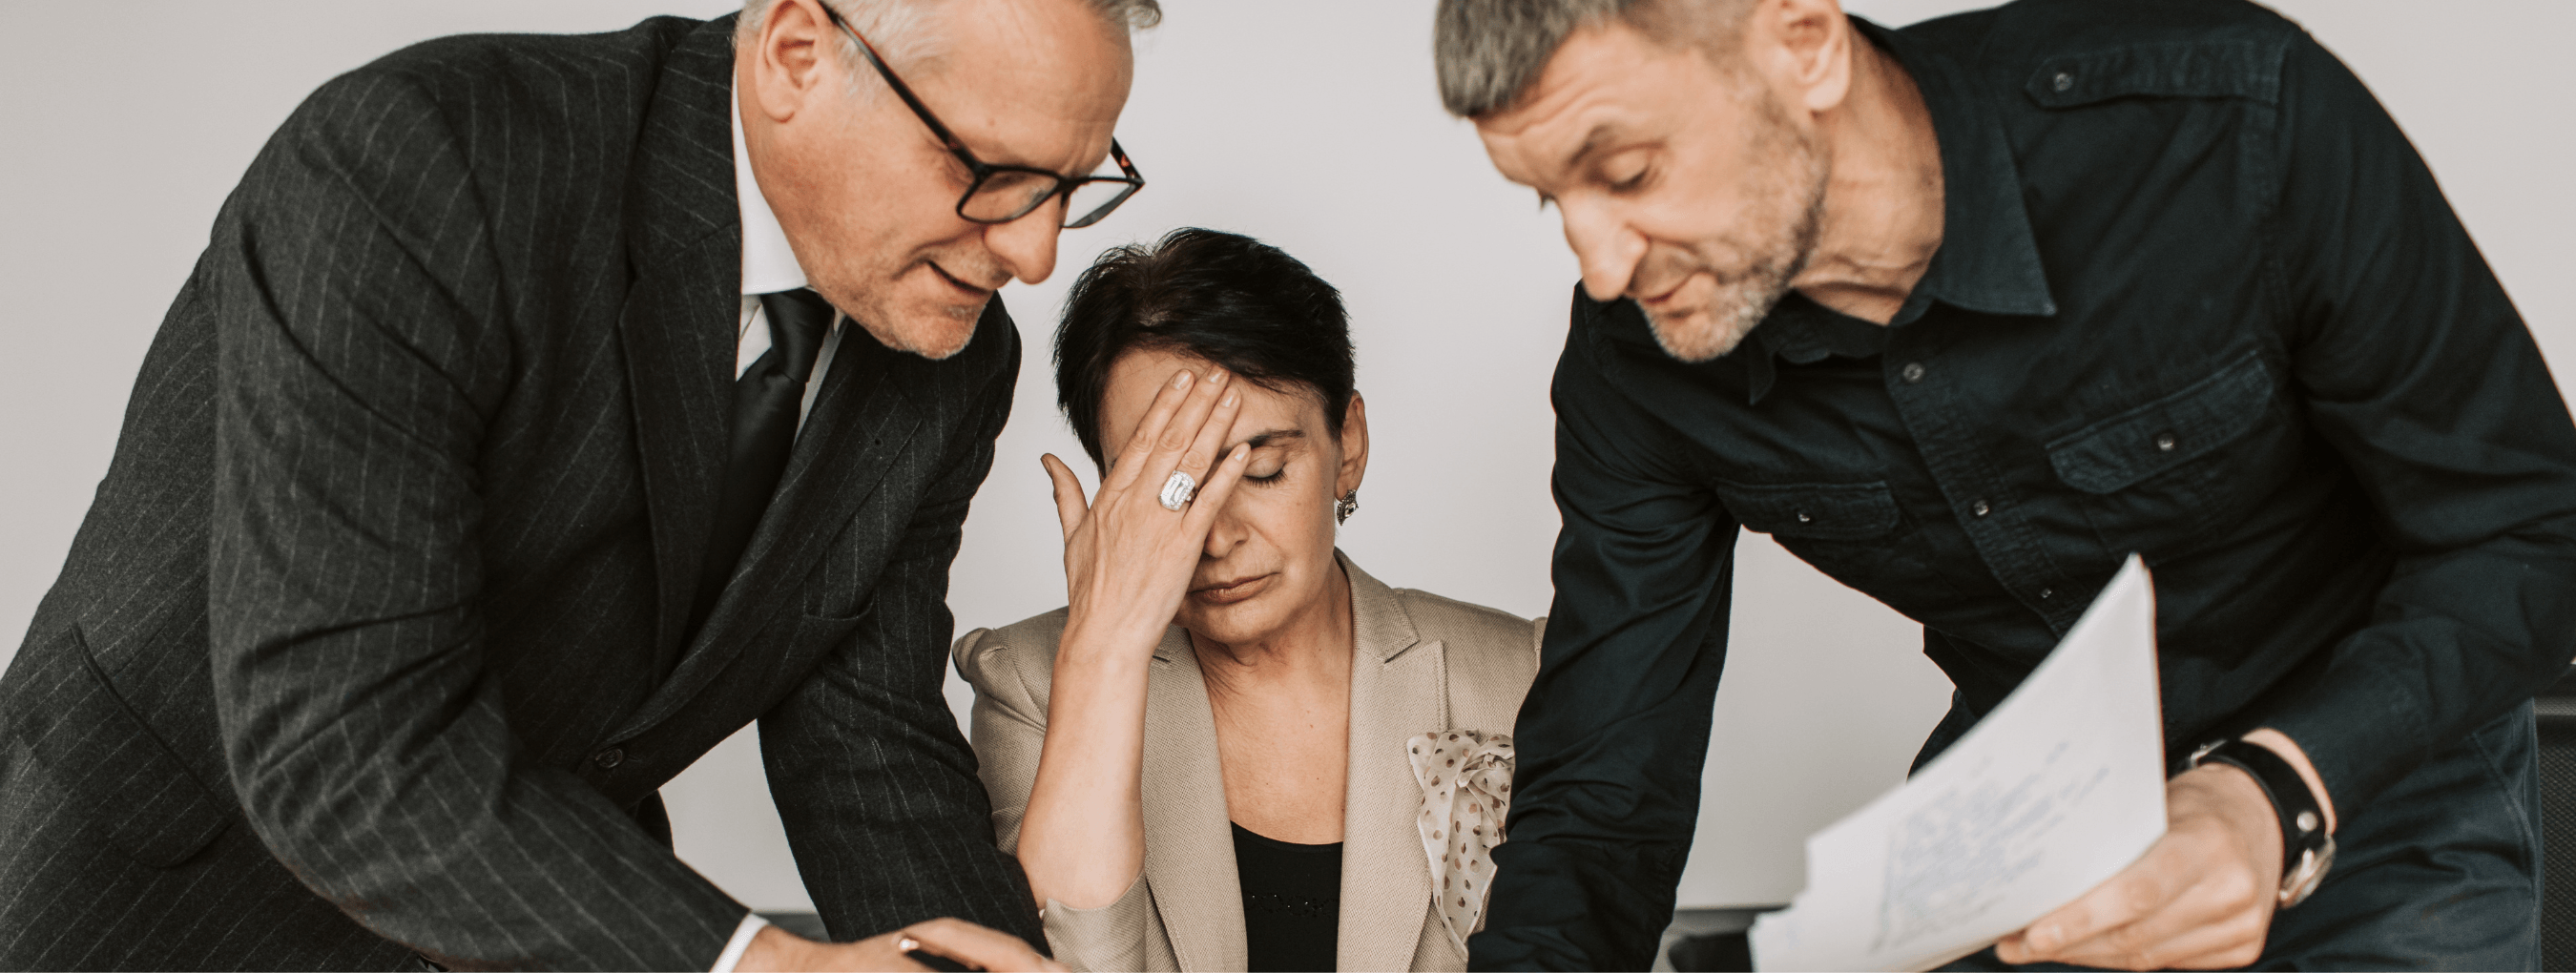 Prioritize Mental Health in the Workplace with Harassment Prevention